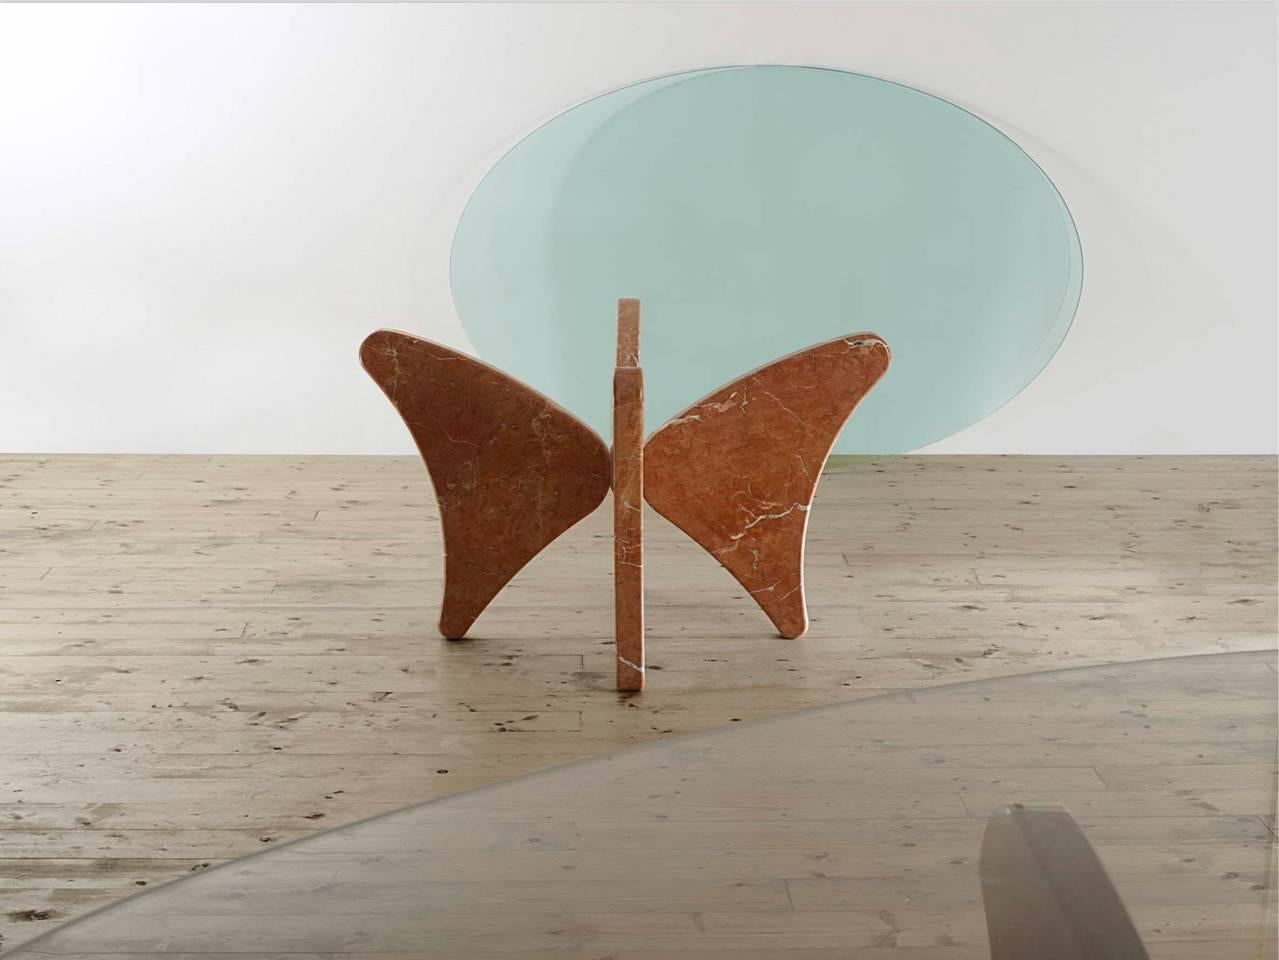  The Rosso Alicante table was created by Bruno Vaerini an Italian Architect/sculpturer in 2009. The table was inspired by the altarpiece of Piero Della Francesca placed in Brera. In the painting the red color comes from the marble in the background.